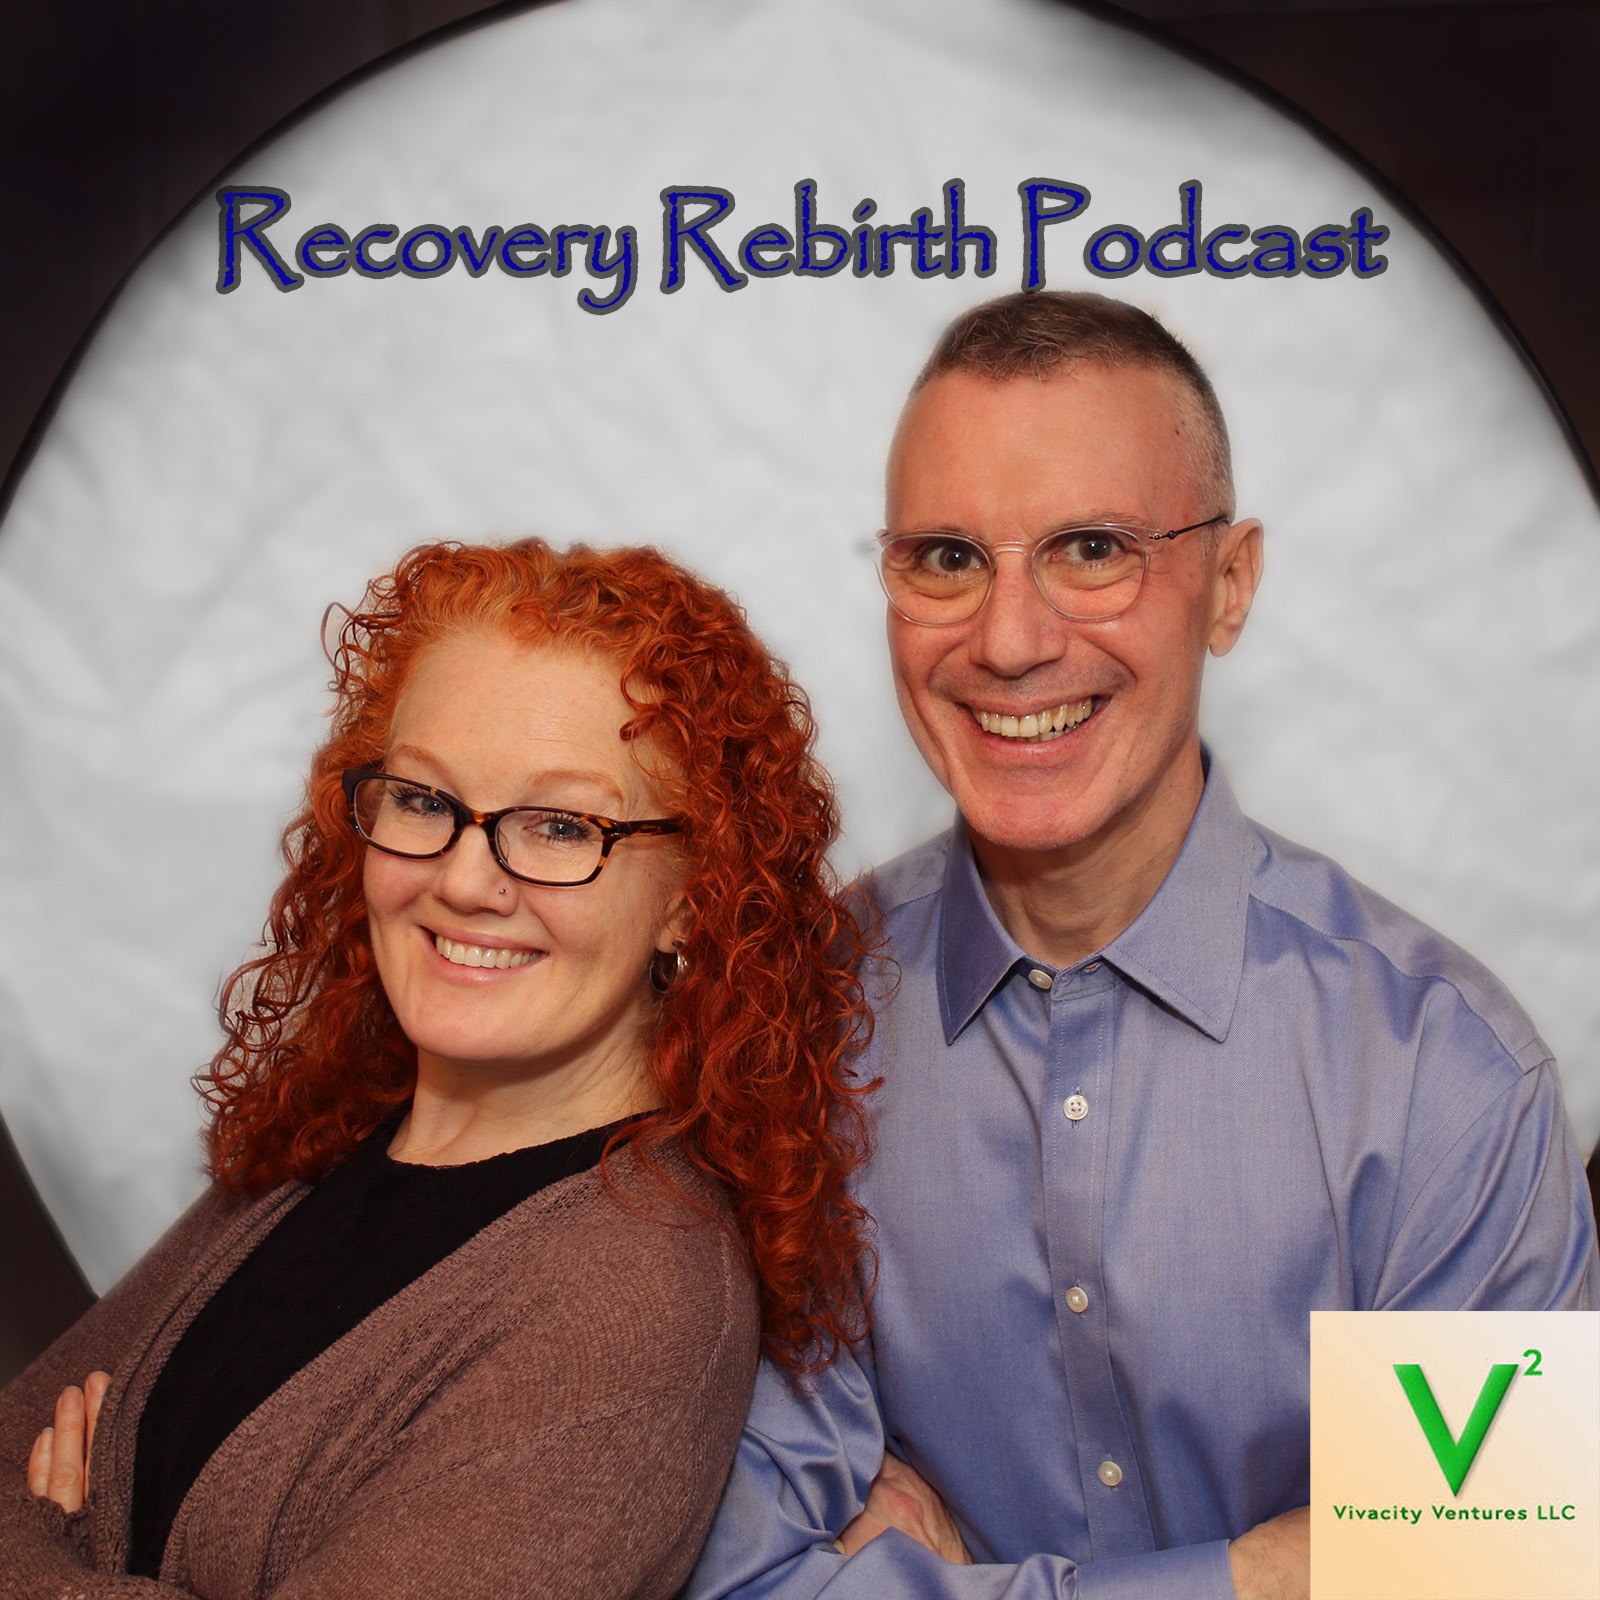 Recovery Rebirth Podcast